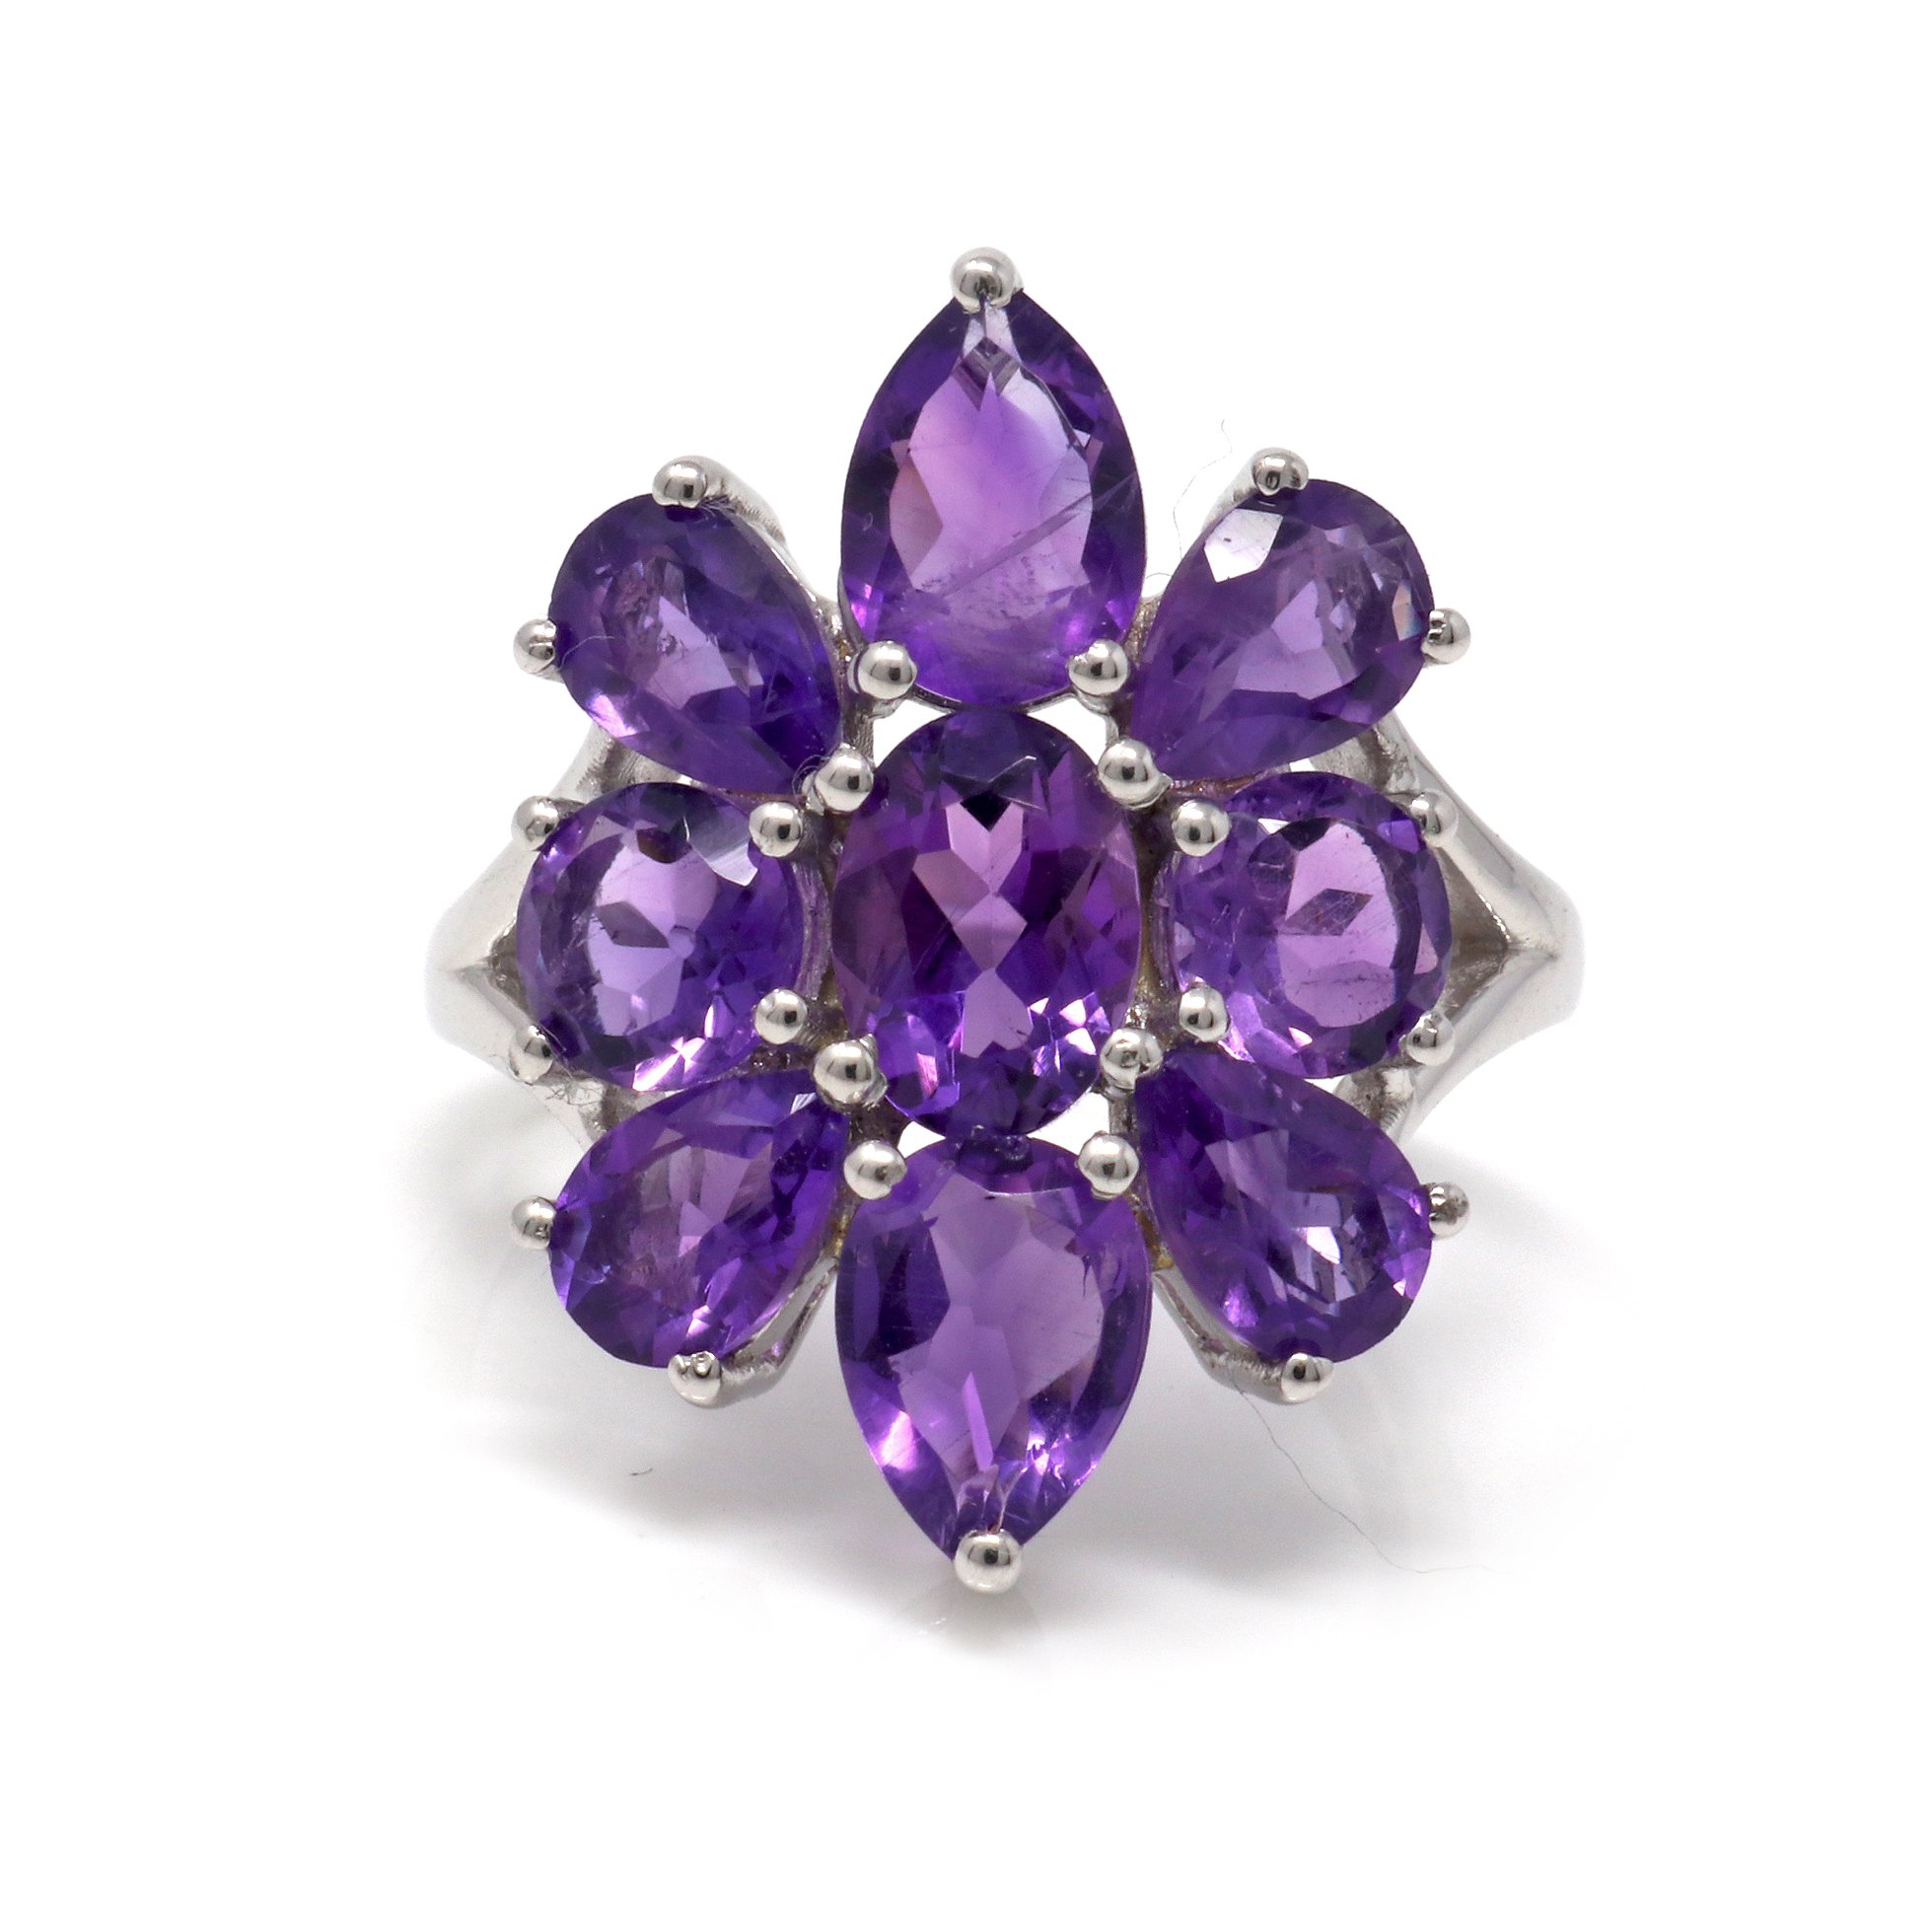 Amethyst Ring Size 6 - with 9 Faceted Stones In Shape Of Dahlia Flower Set On Silver Band With Cutout Top - Prong Set